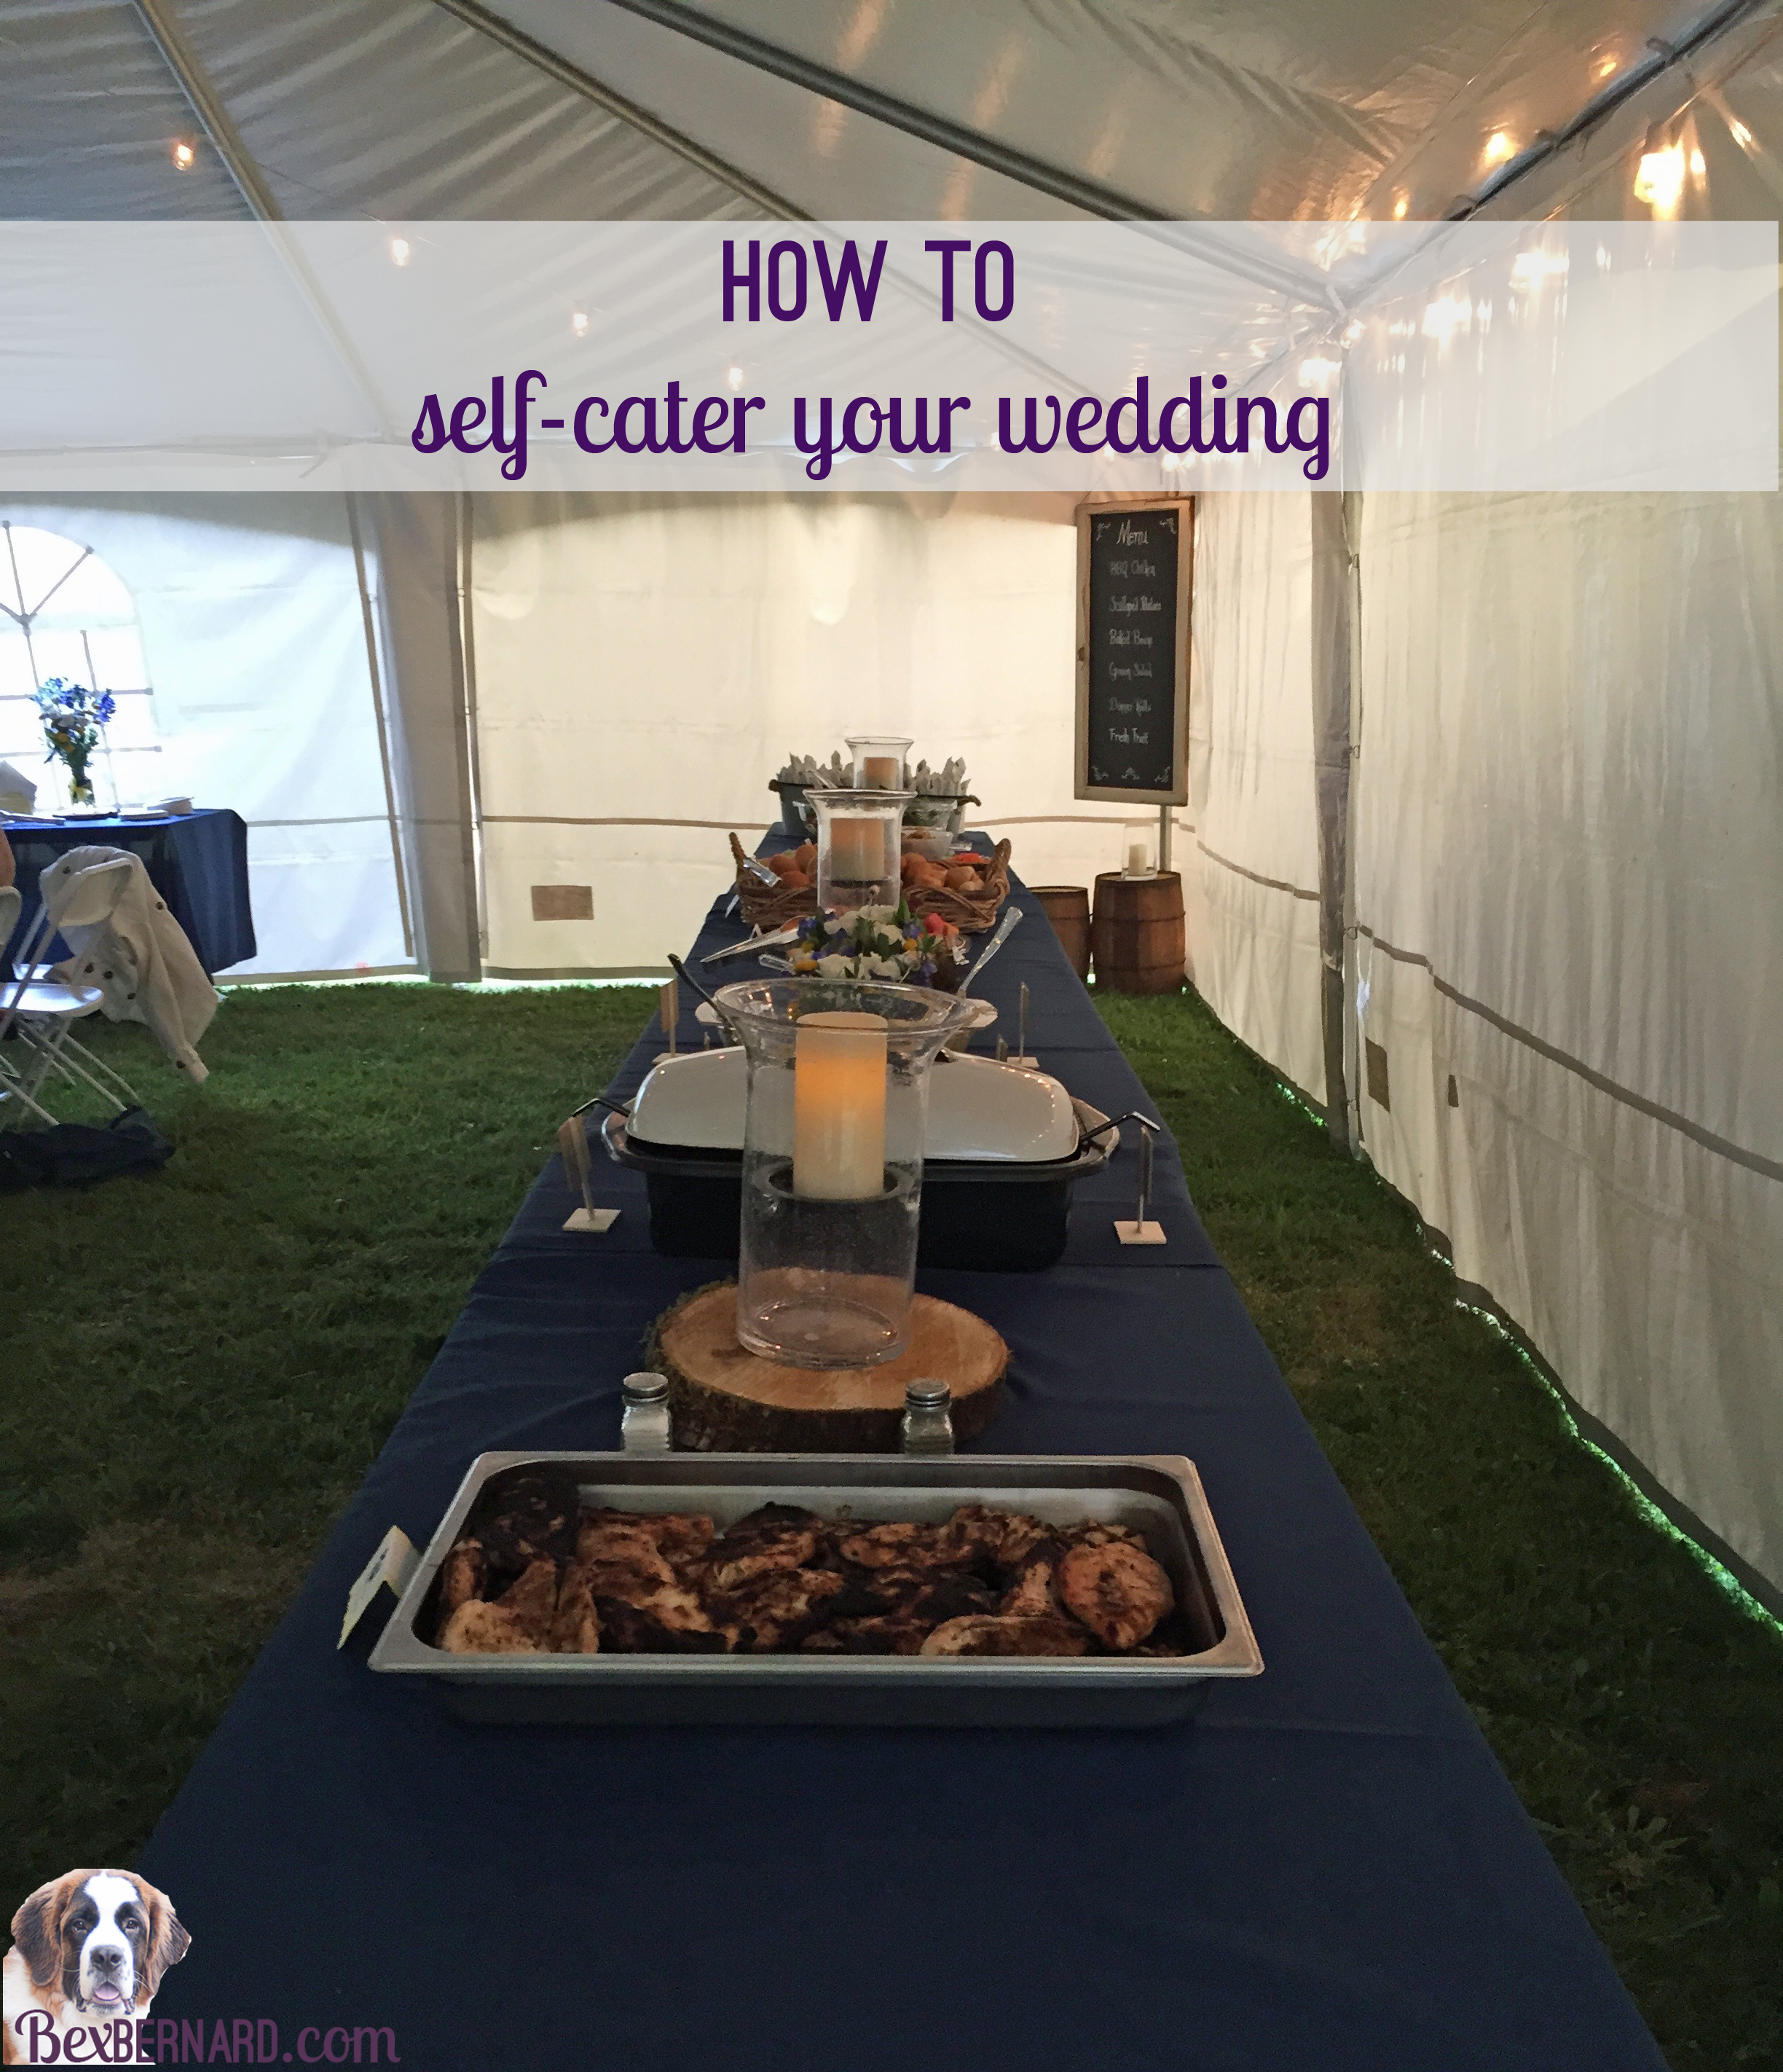 how to self-cater your wedding. catering timeline and quantities for 225 guests. self-catered saves money. | bexbernard.com